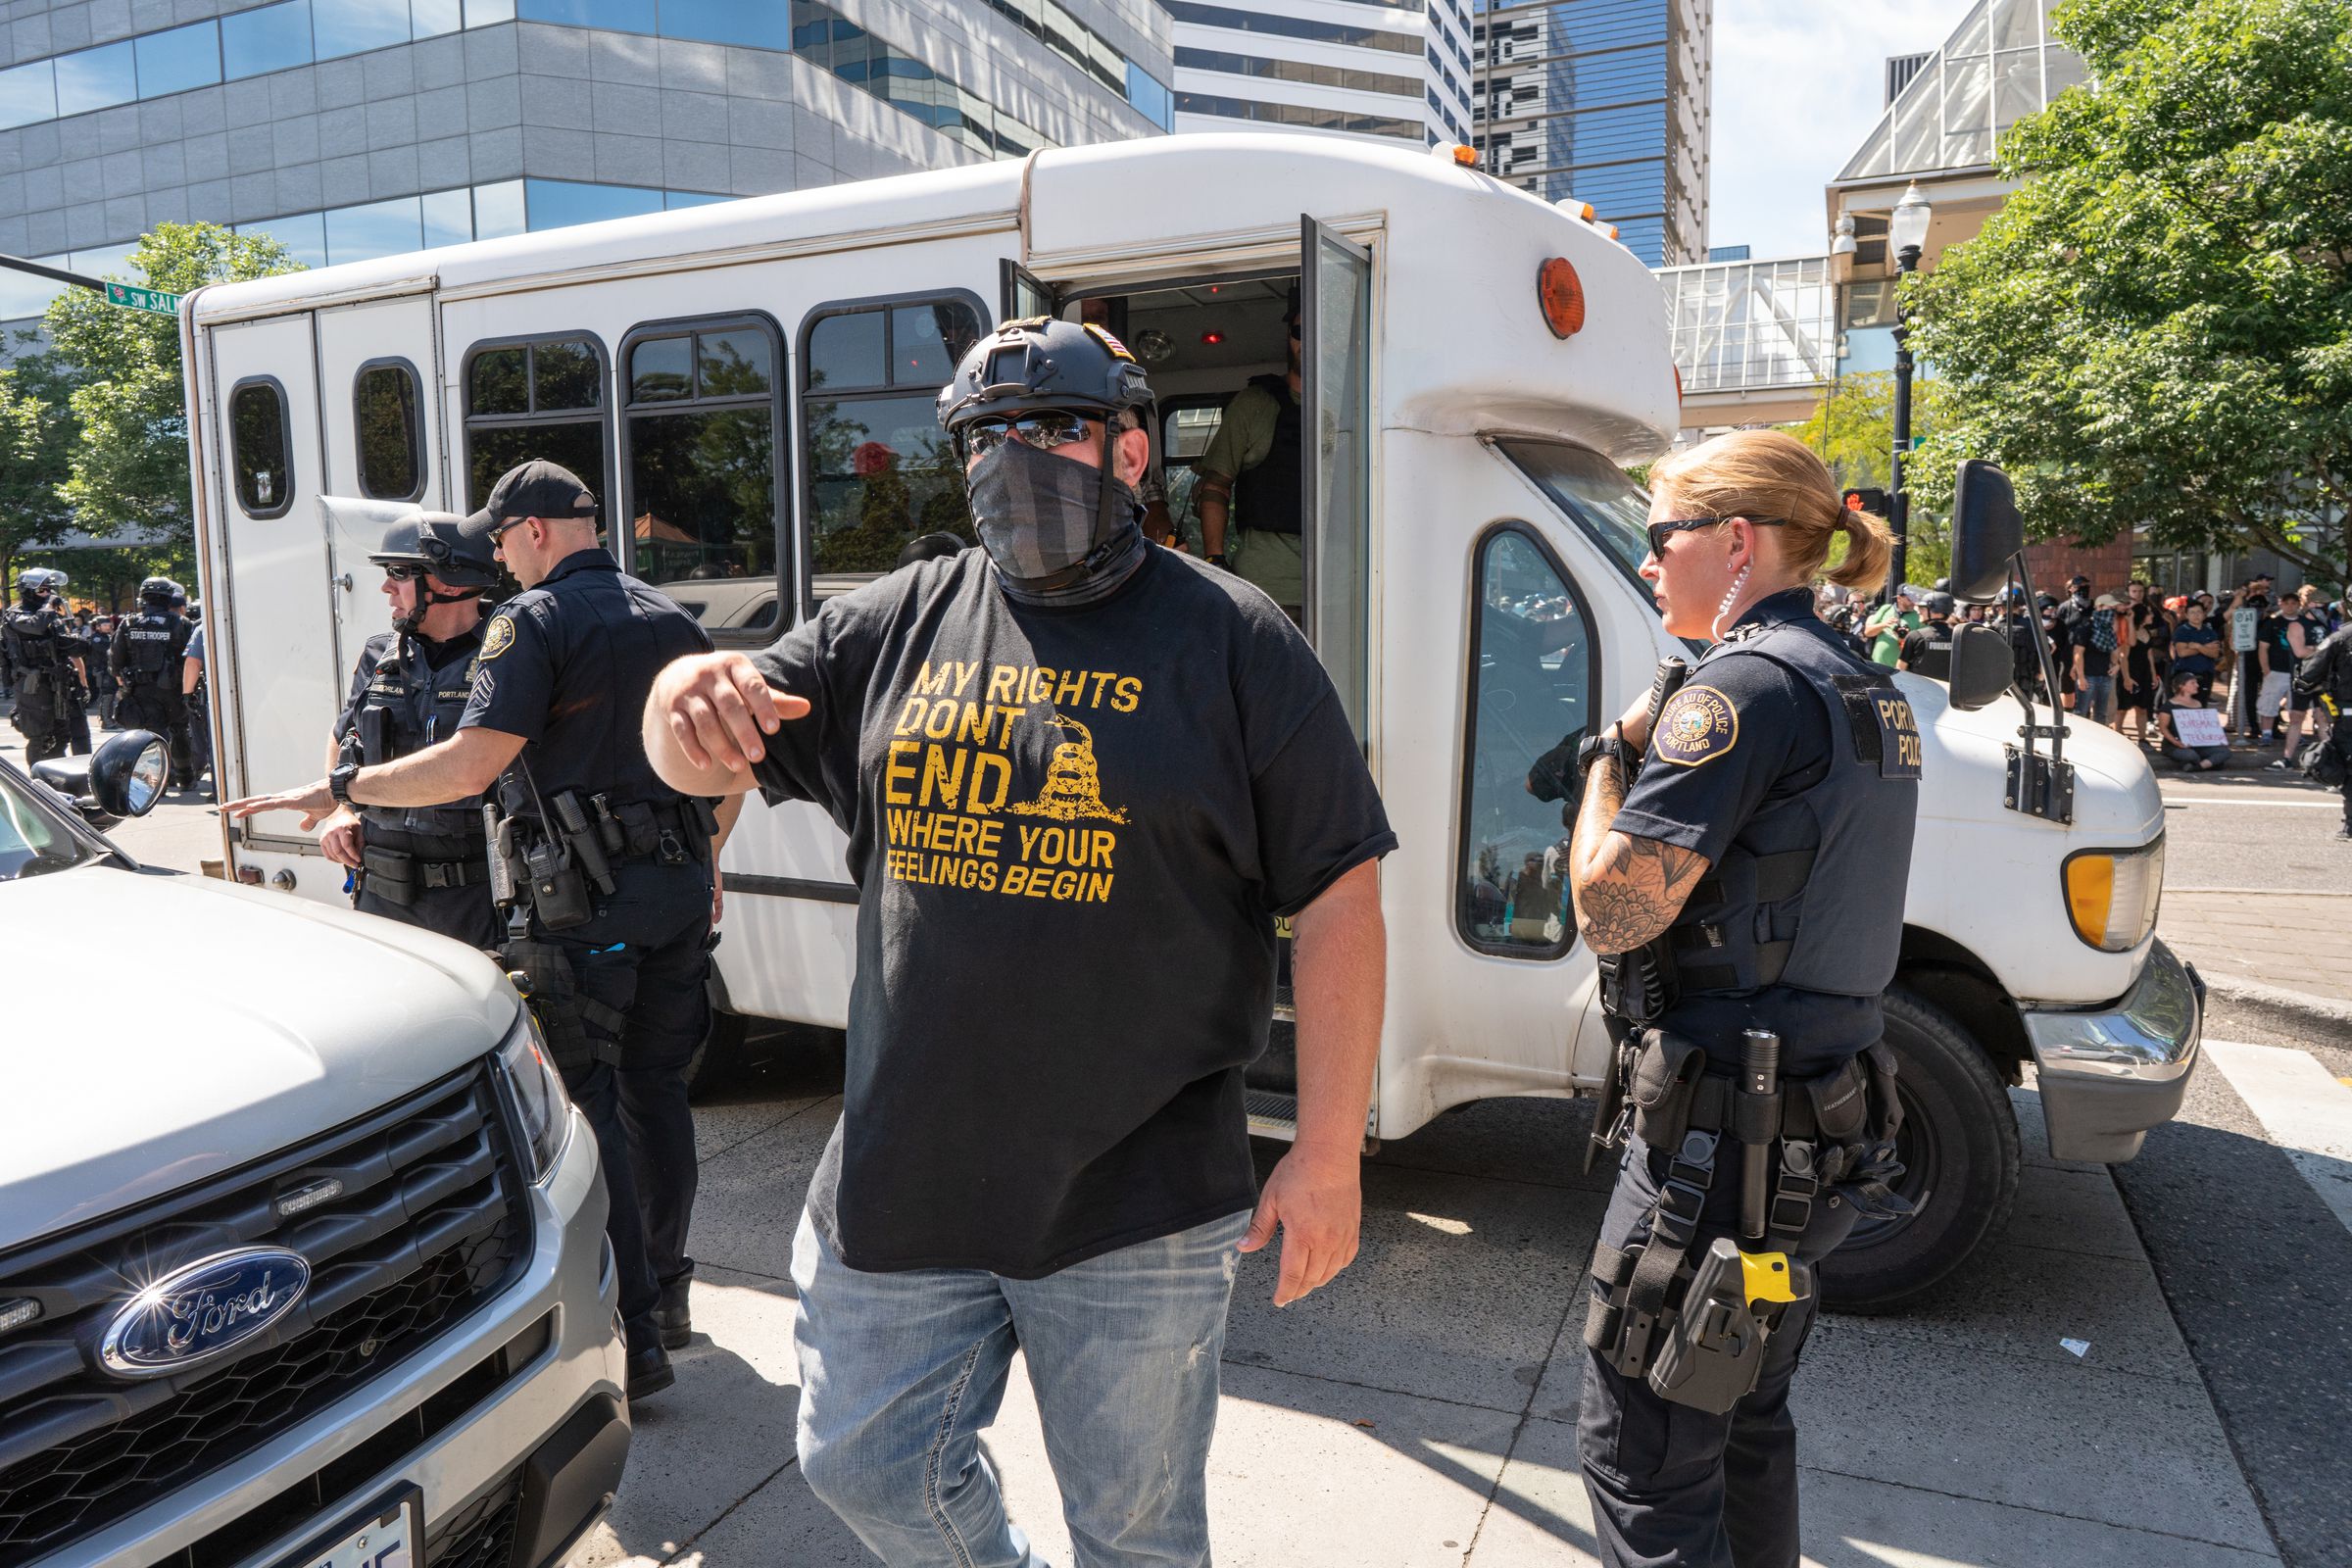 A Proud Boys leader ushers far right protesters onto a bus...